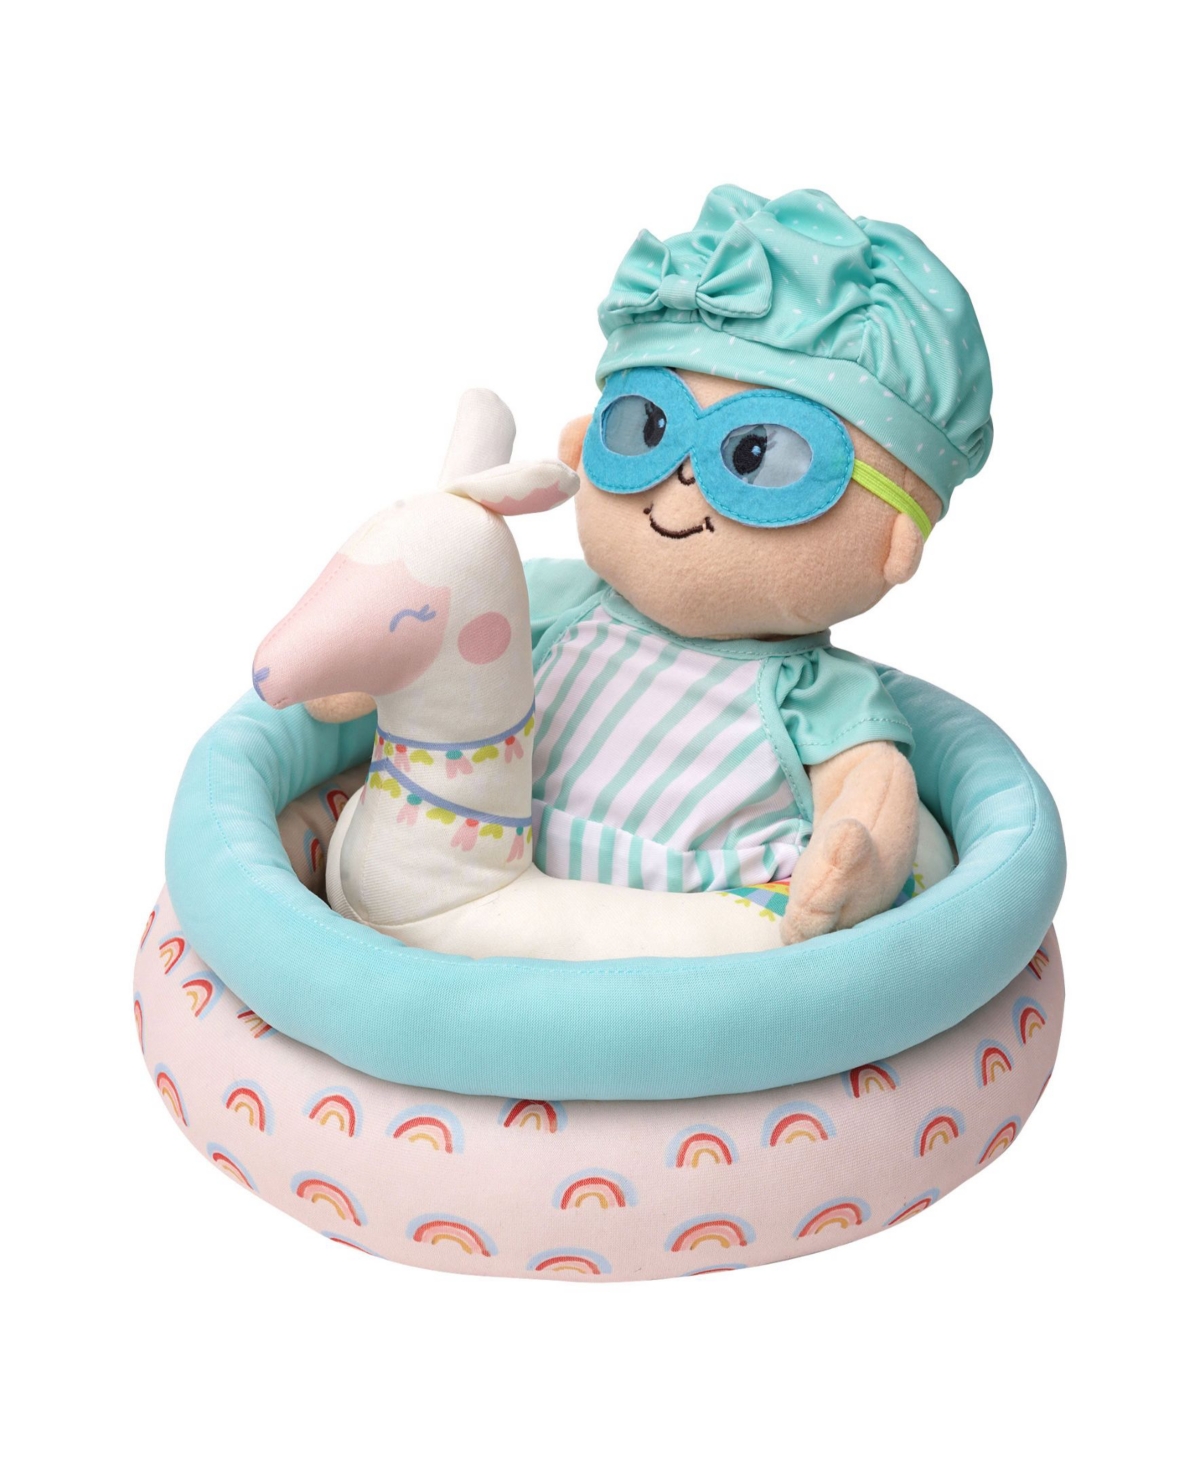 Manhattan Toy Company Stella Collection Baby Doll Pool Play Set, 4 Piece In Multi